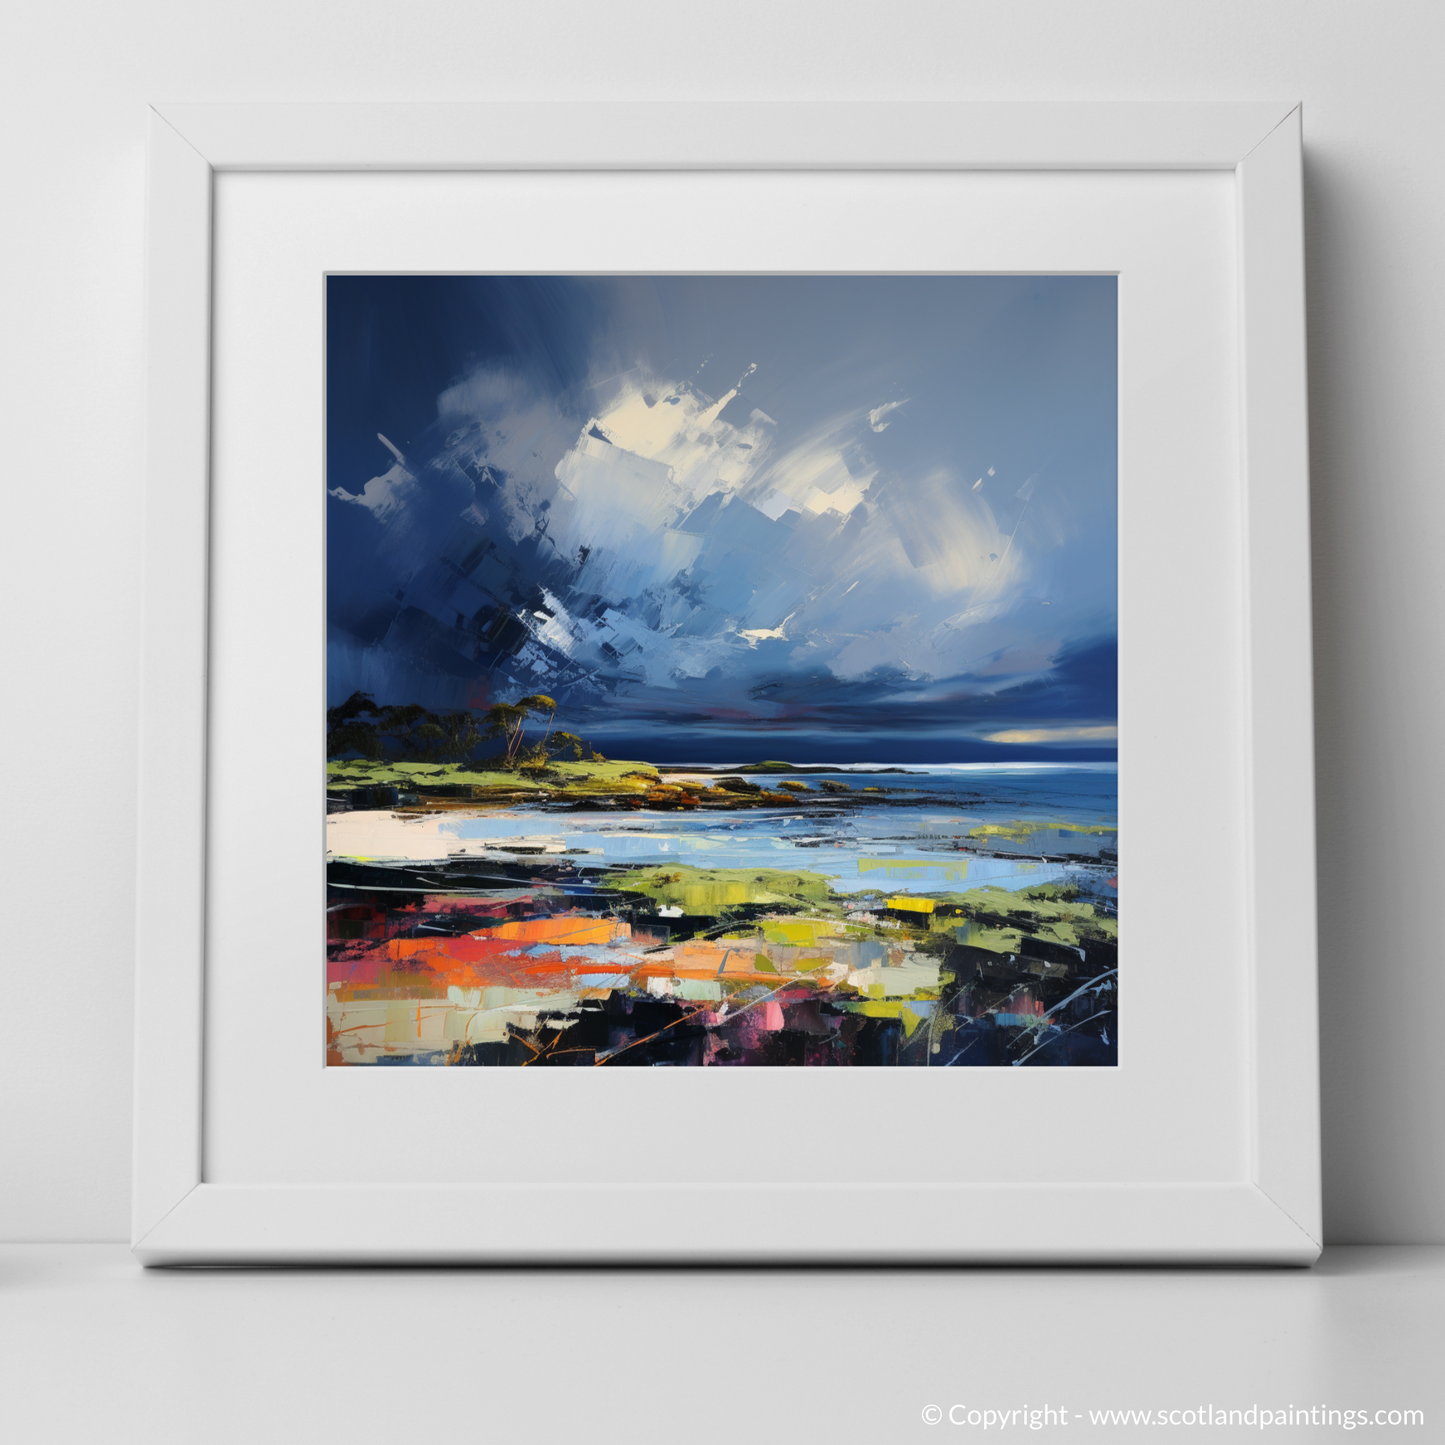 Art Print of Largo Bay with a stormy sky with a white frame